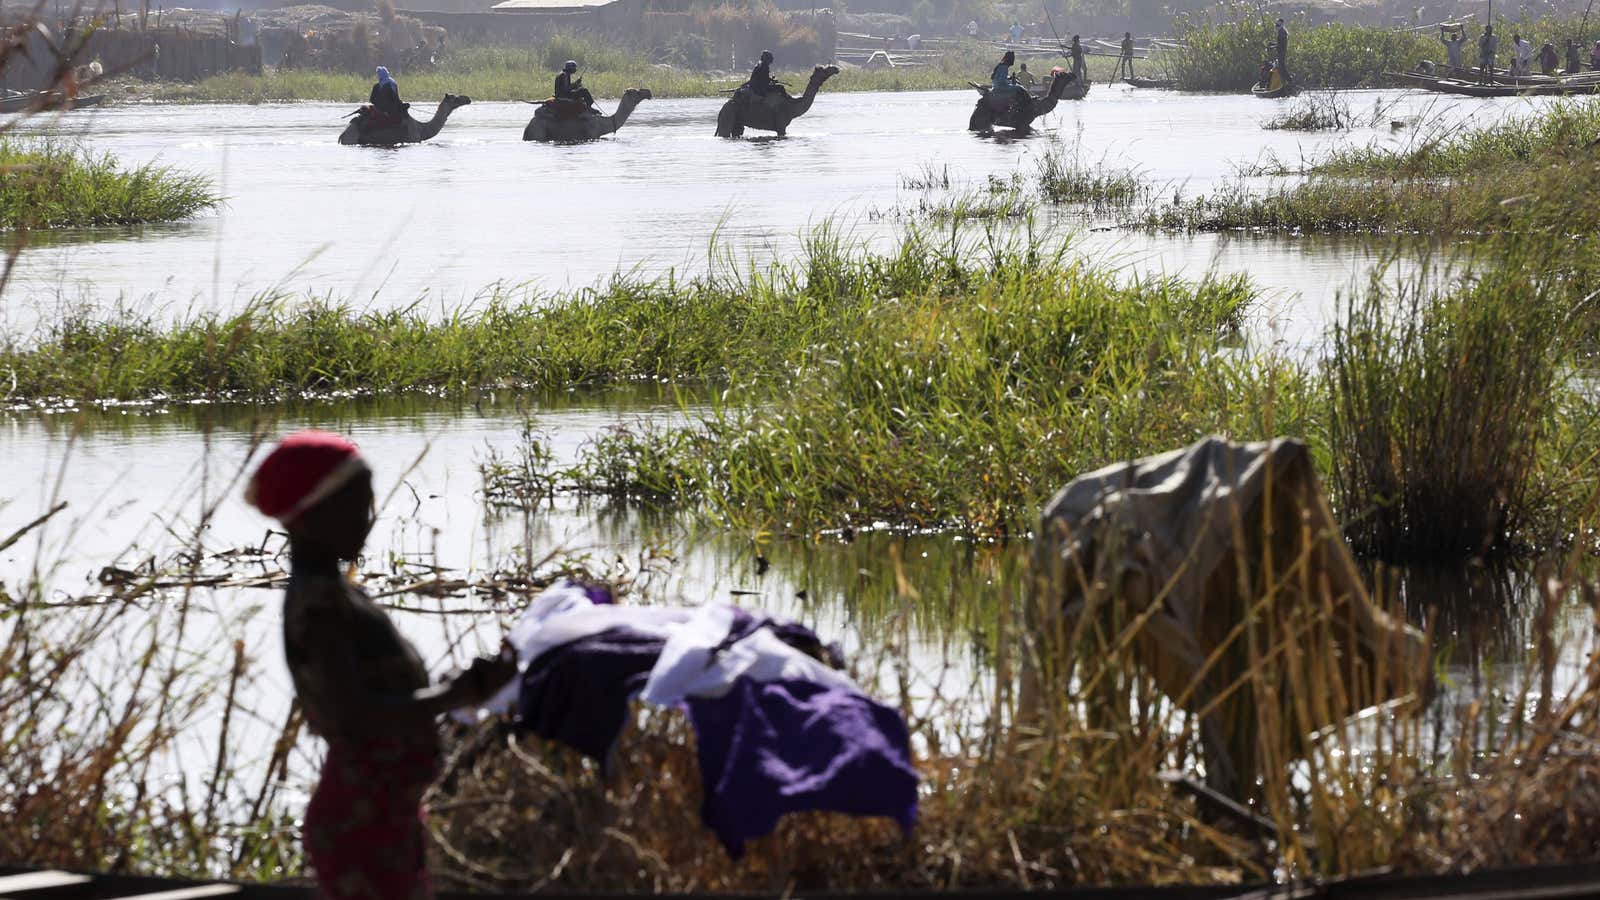 Men on camels cross the water as a woman washes clothes in Lake Chad in Ngouboua, January, 2015